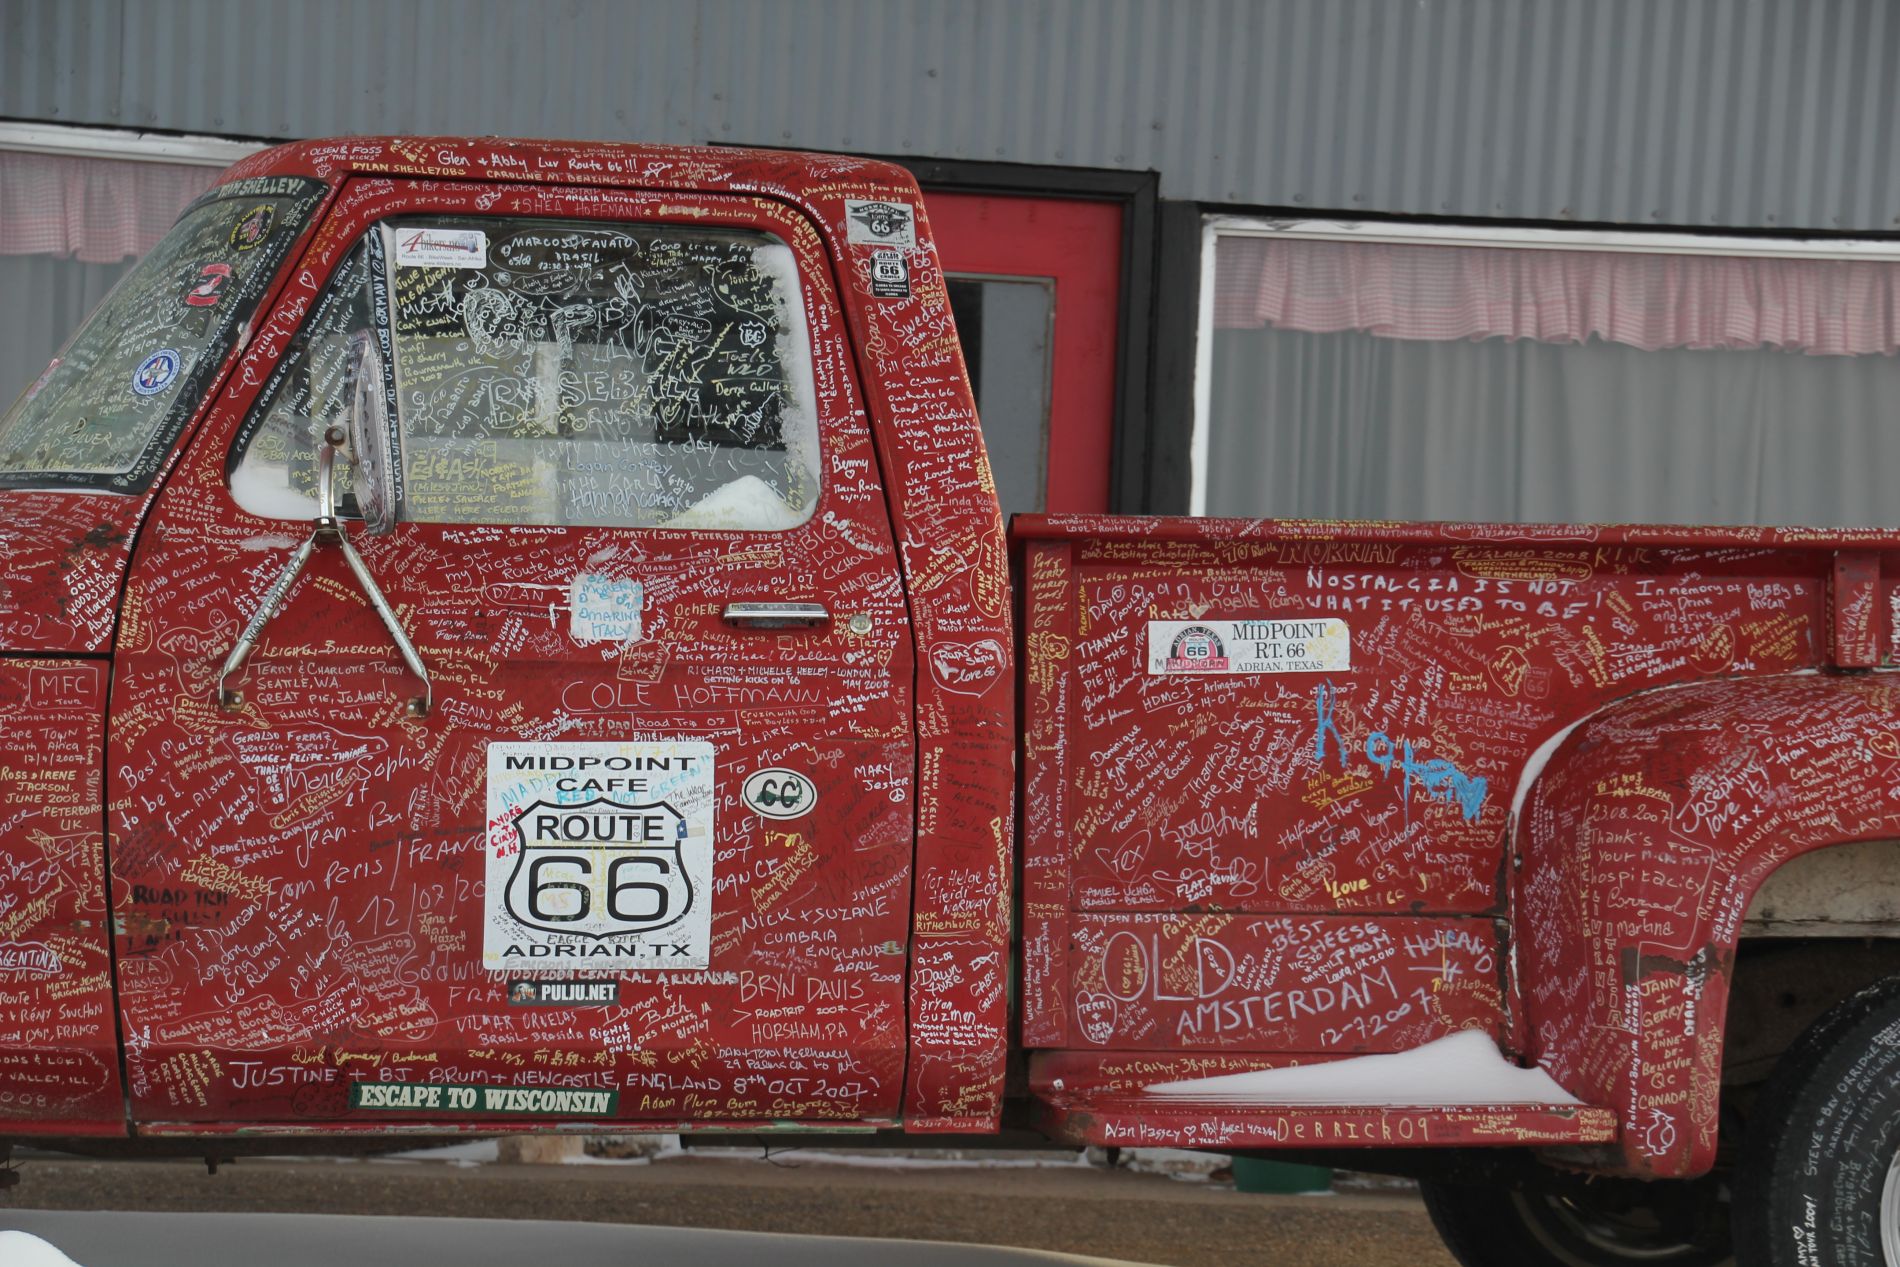 Midpoint Cafe signed truck in Adrian, Texas